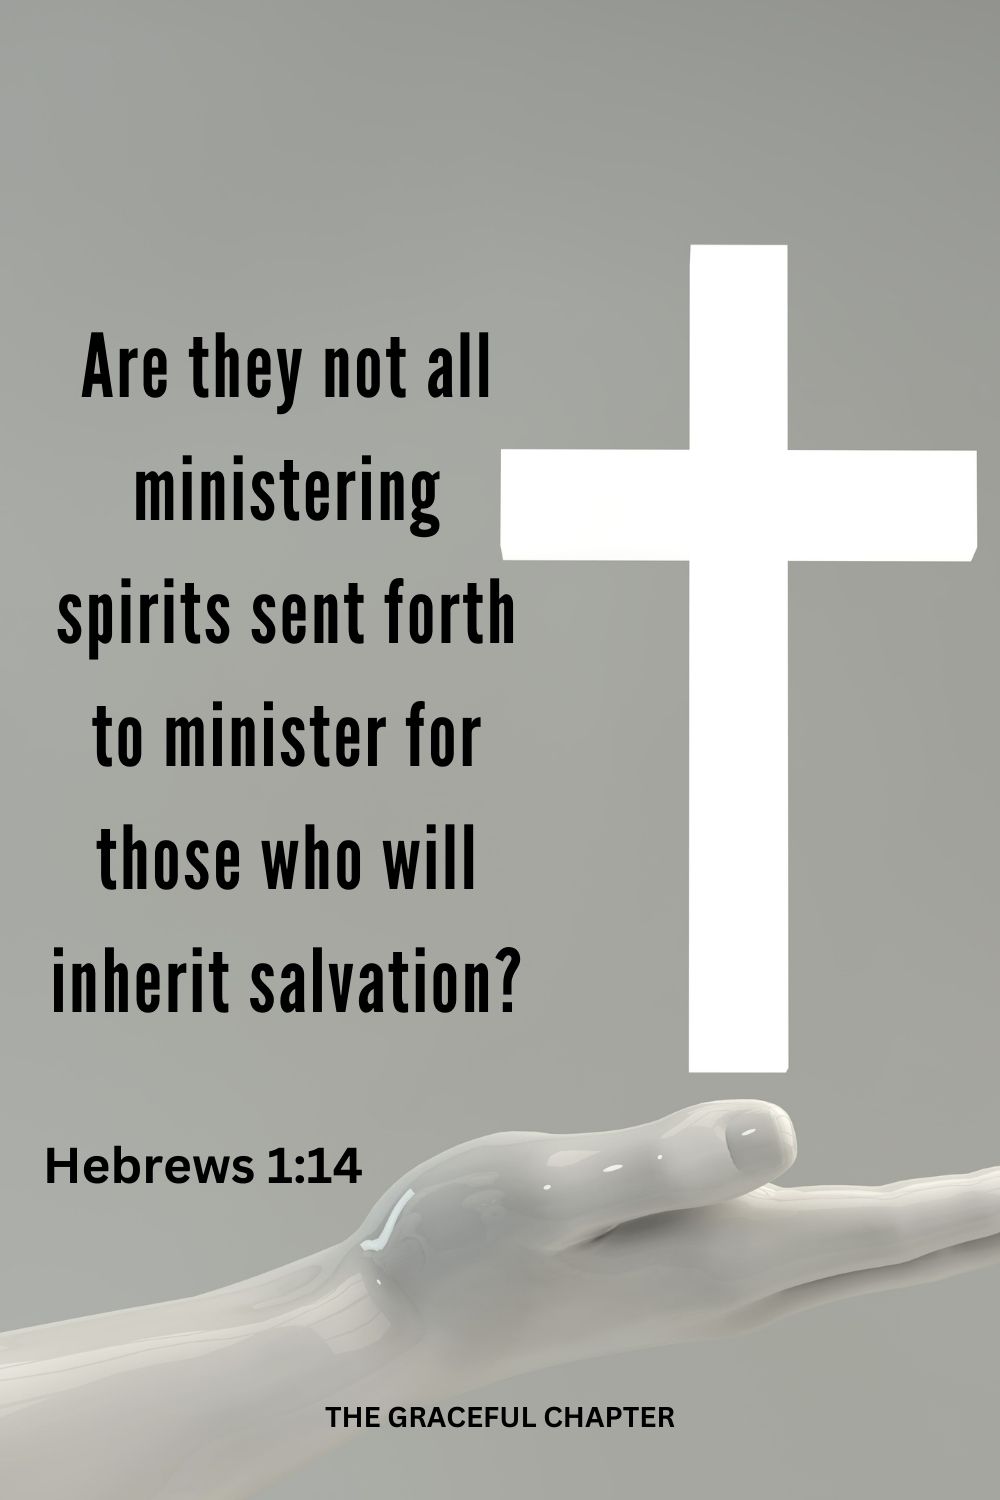 Are they not all ministering spirits sent forth to minister for those who will inherit salvation? Hebrews 1:14